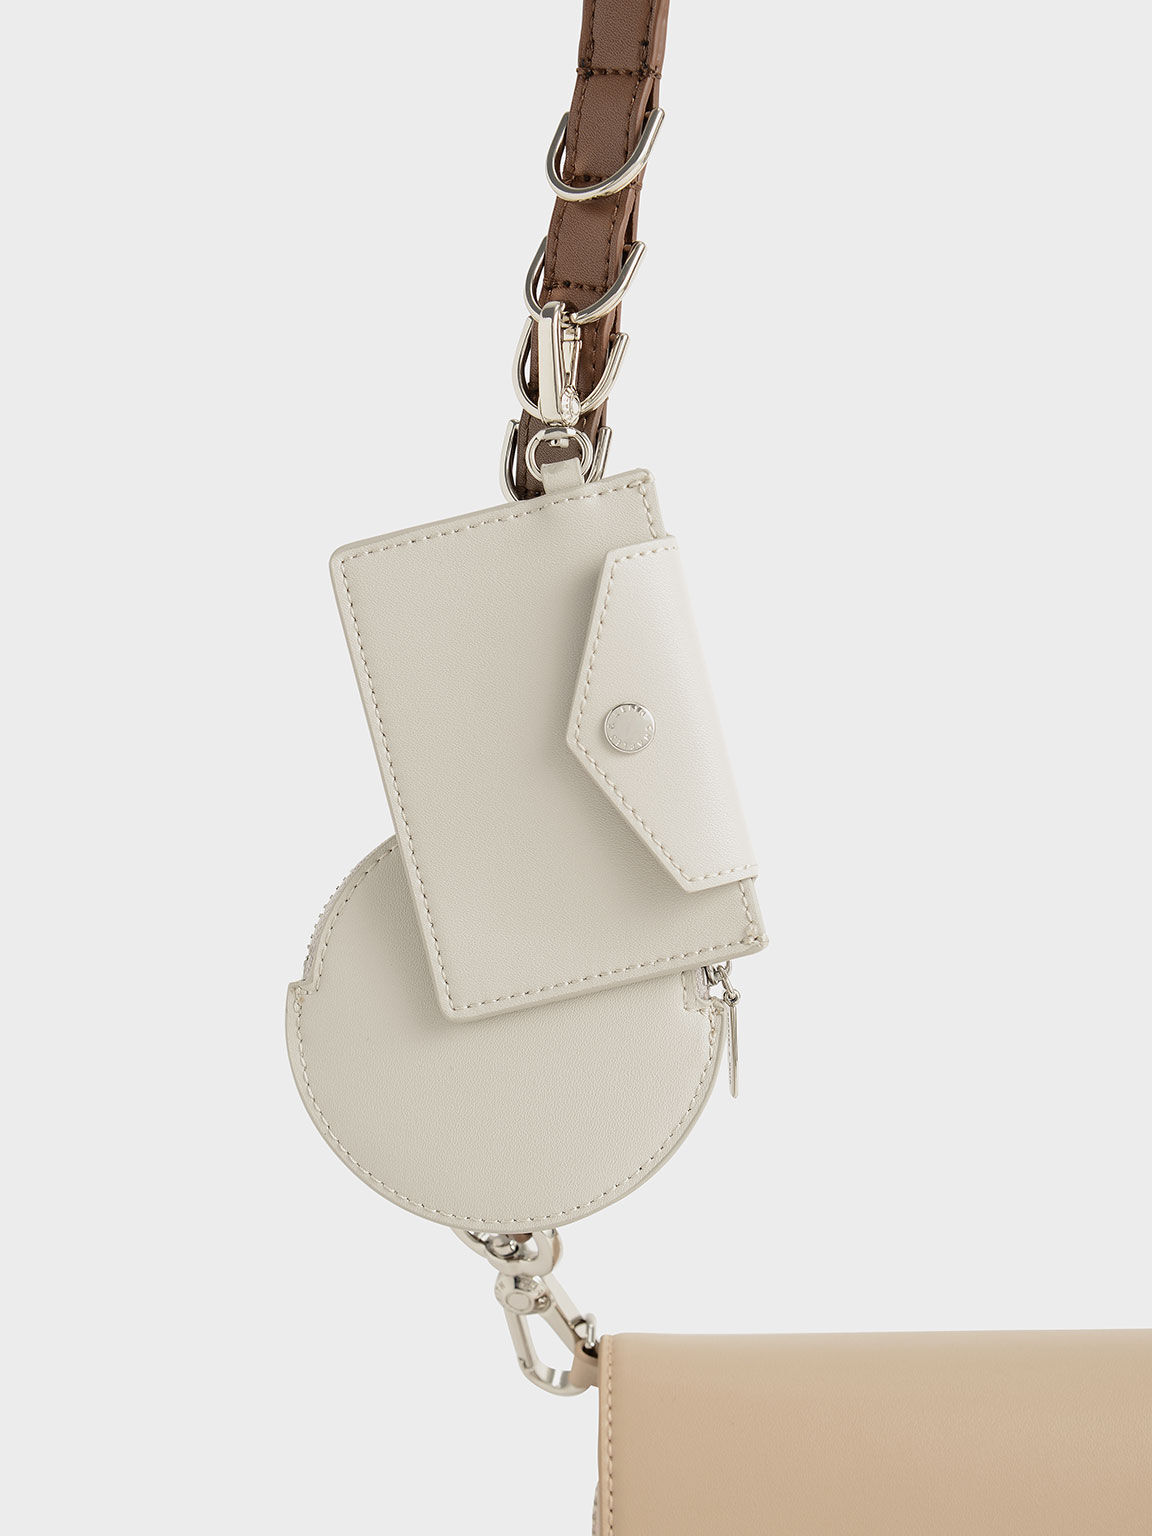 Shop the Trend - Charles & Keith Multi-Pouch Crossbody Bag